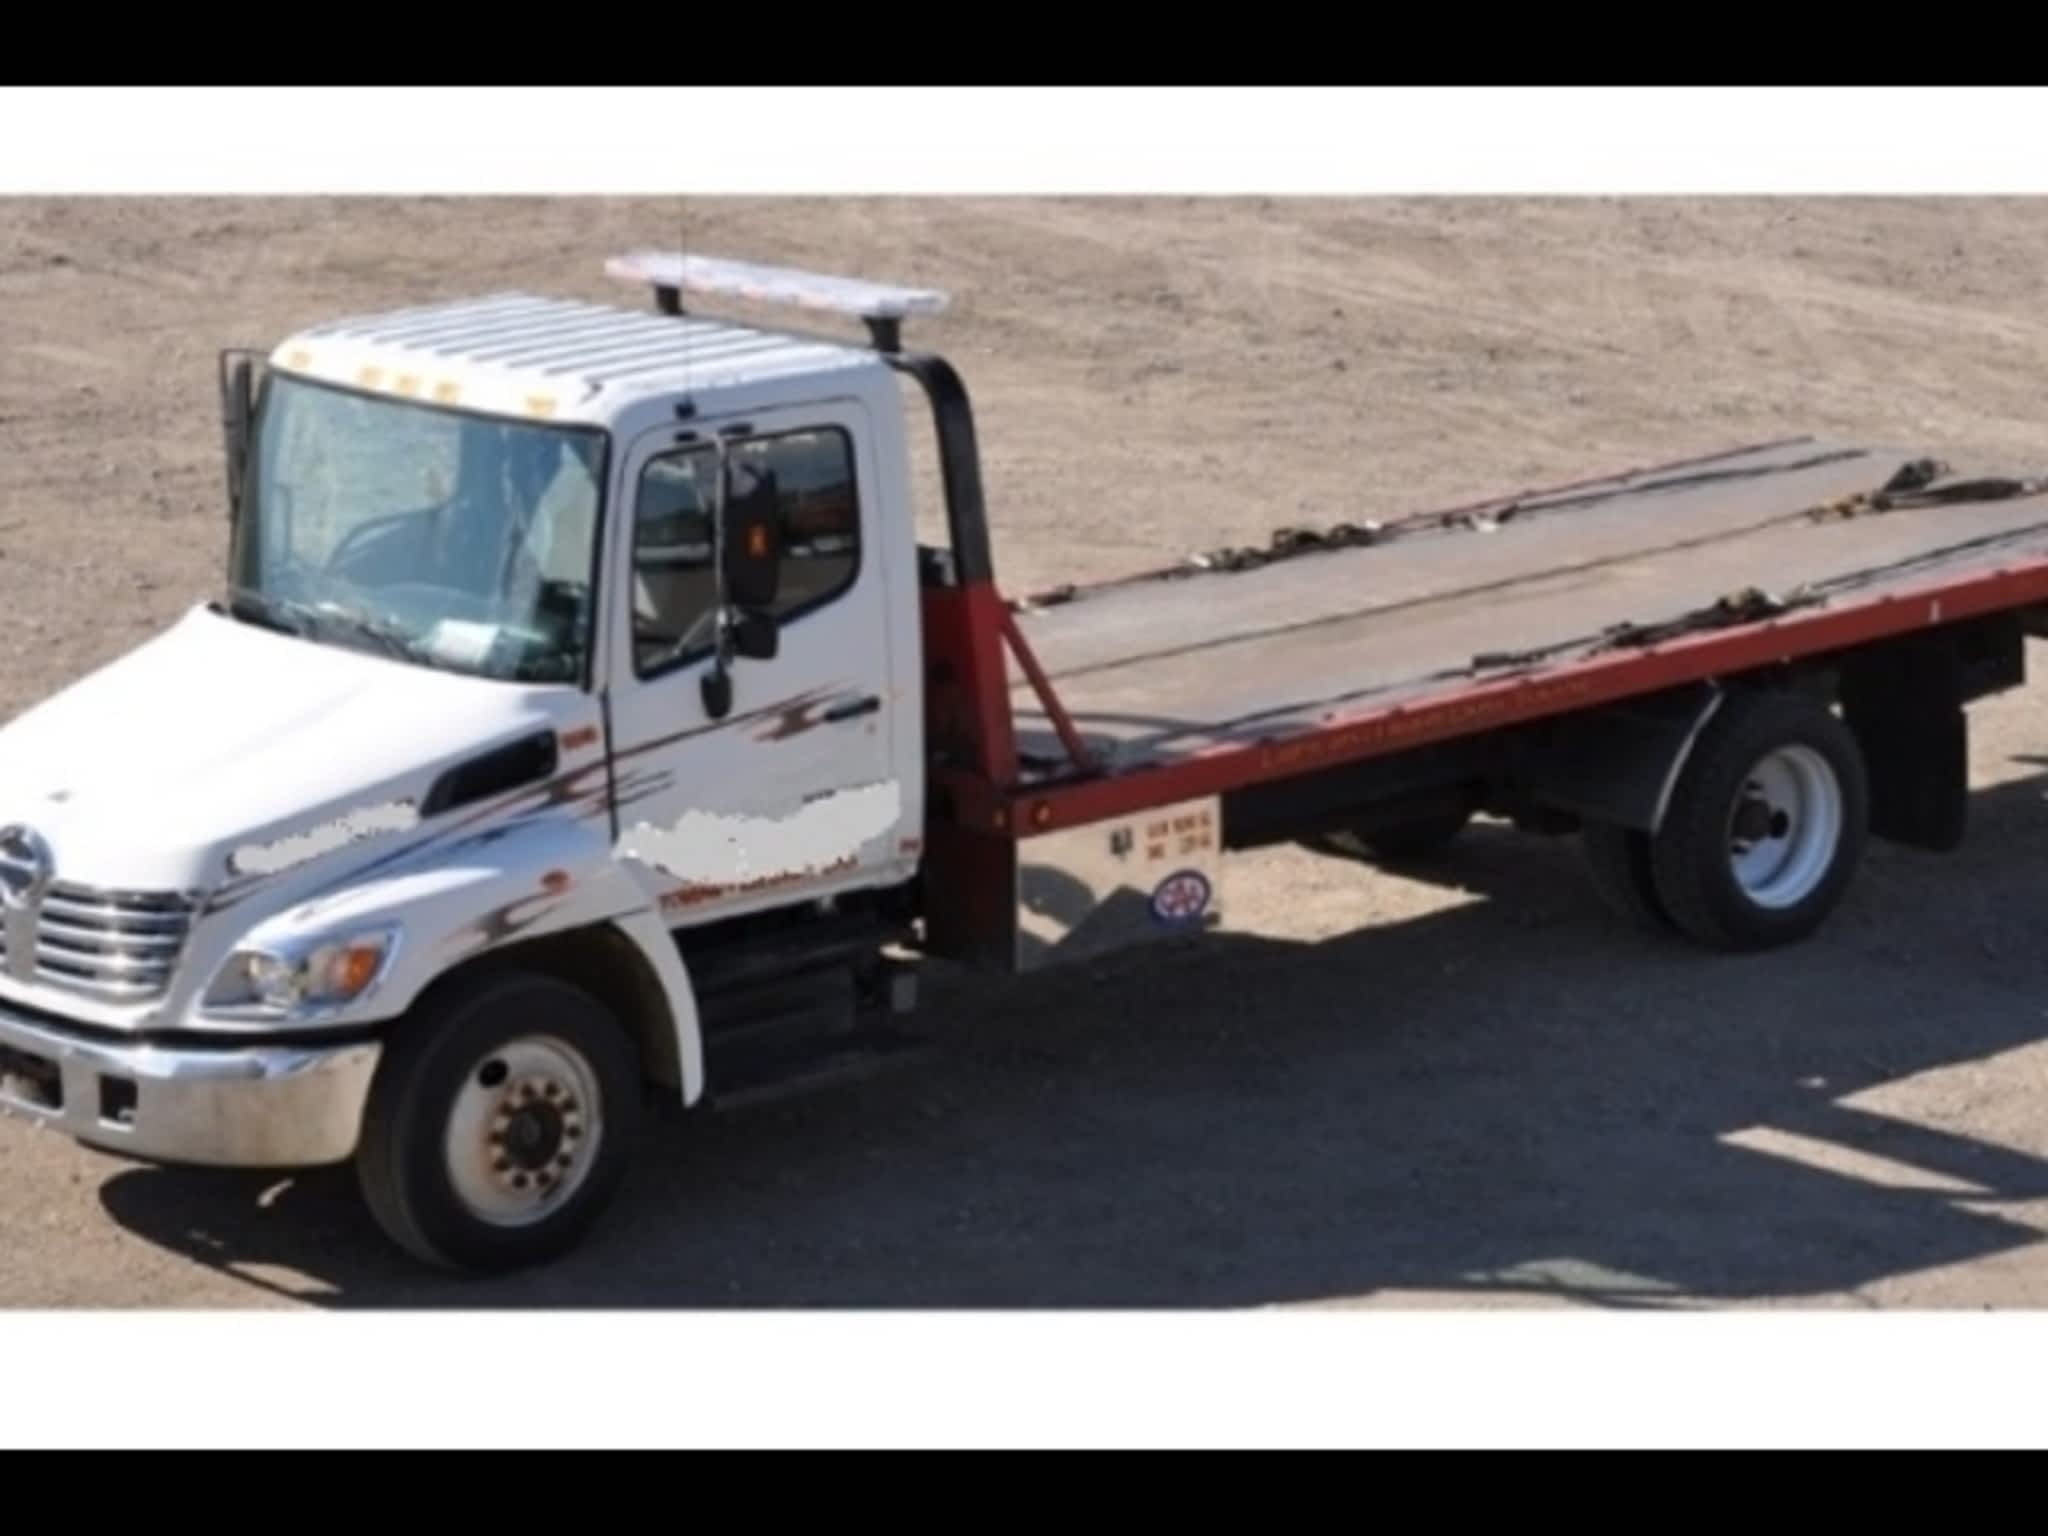 photo Central Towing & Recovery Ltd